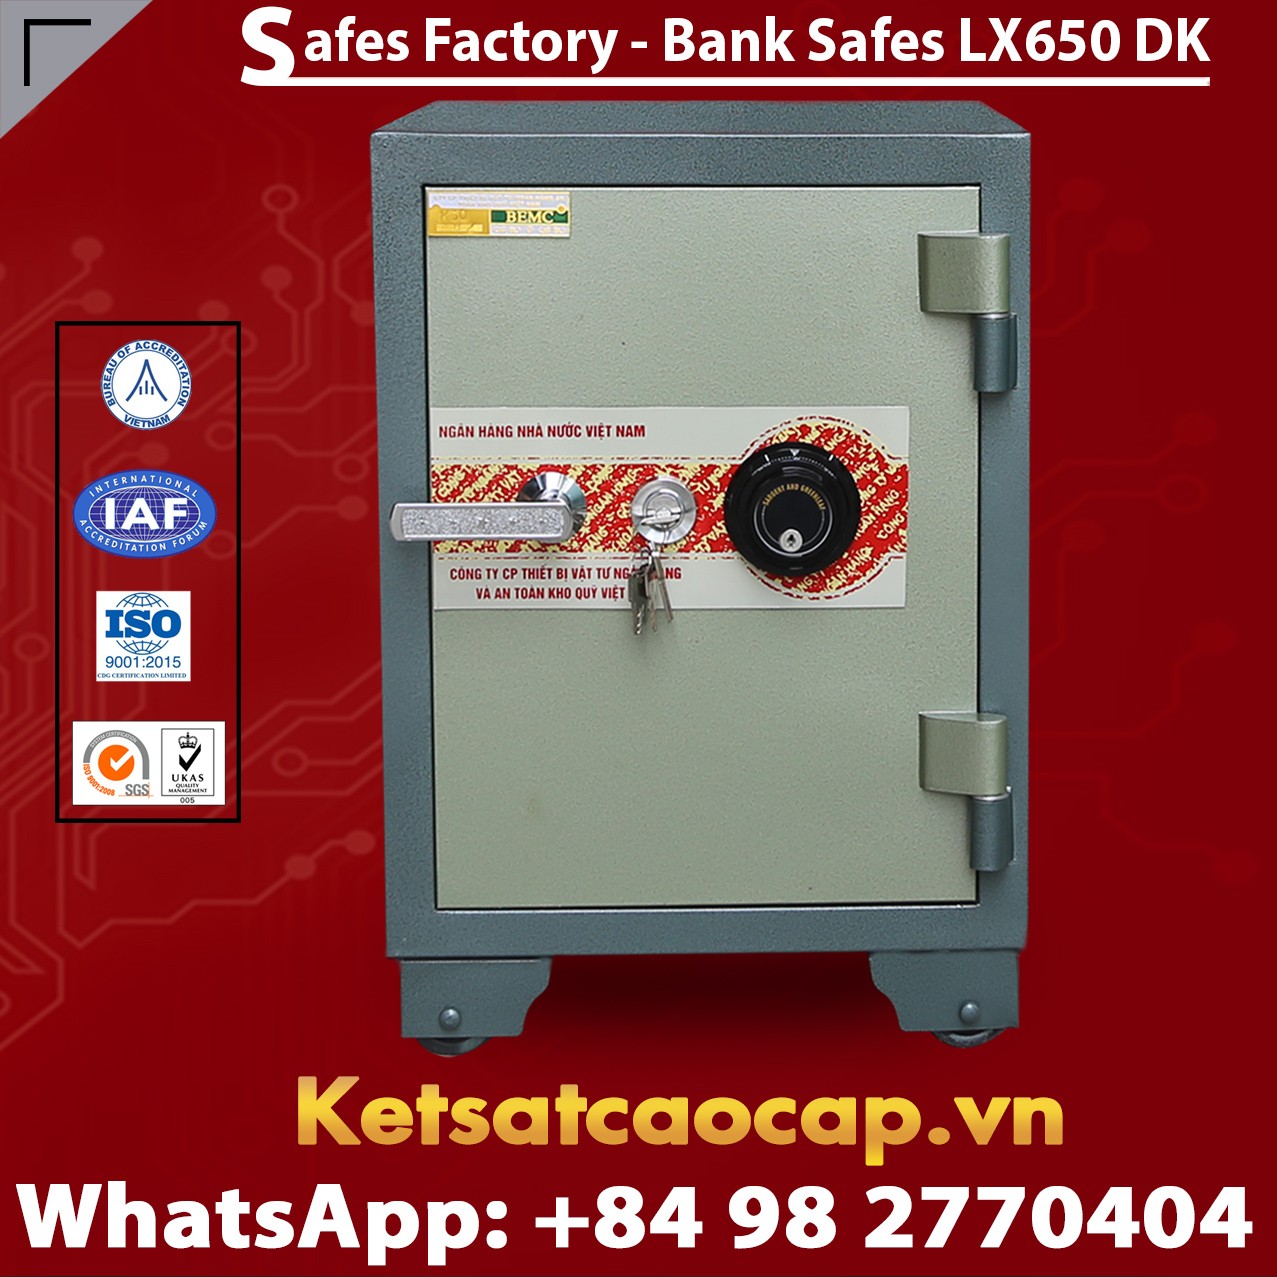 Bank Safes LX650 DK Customized Bank Safes Factory Price For Wholesale